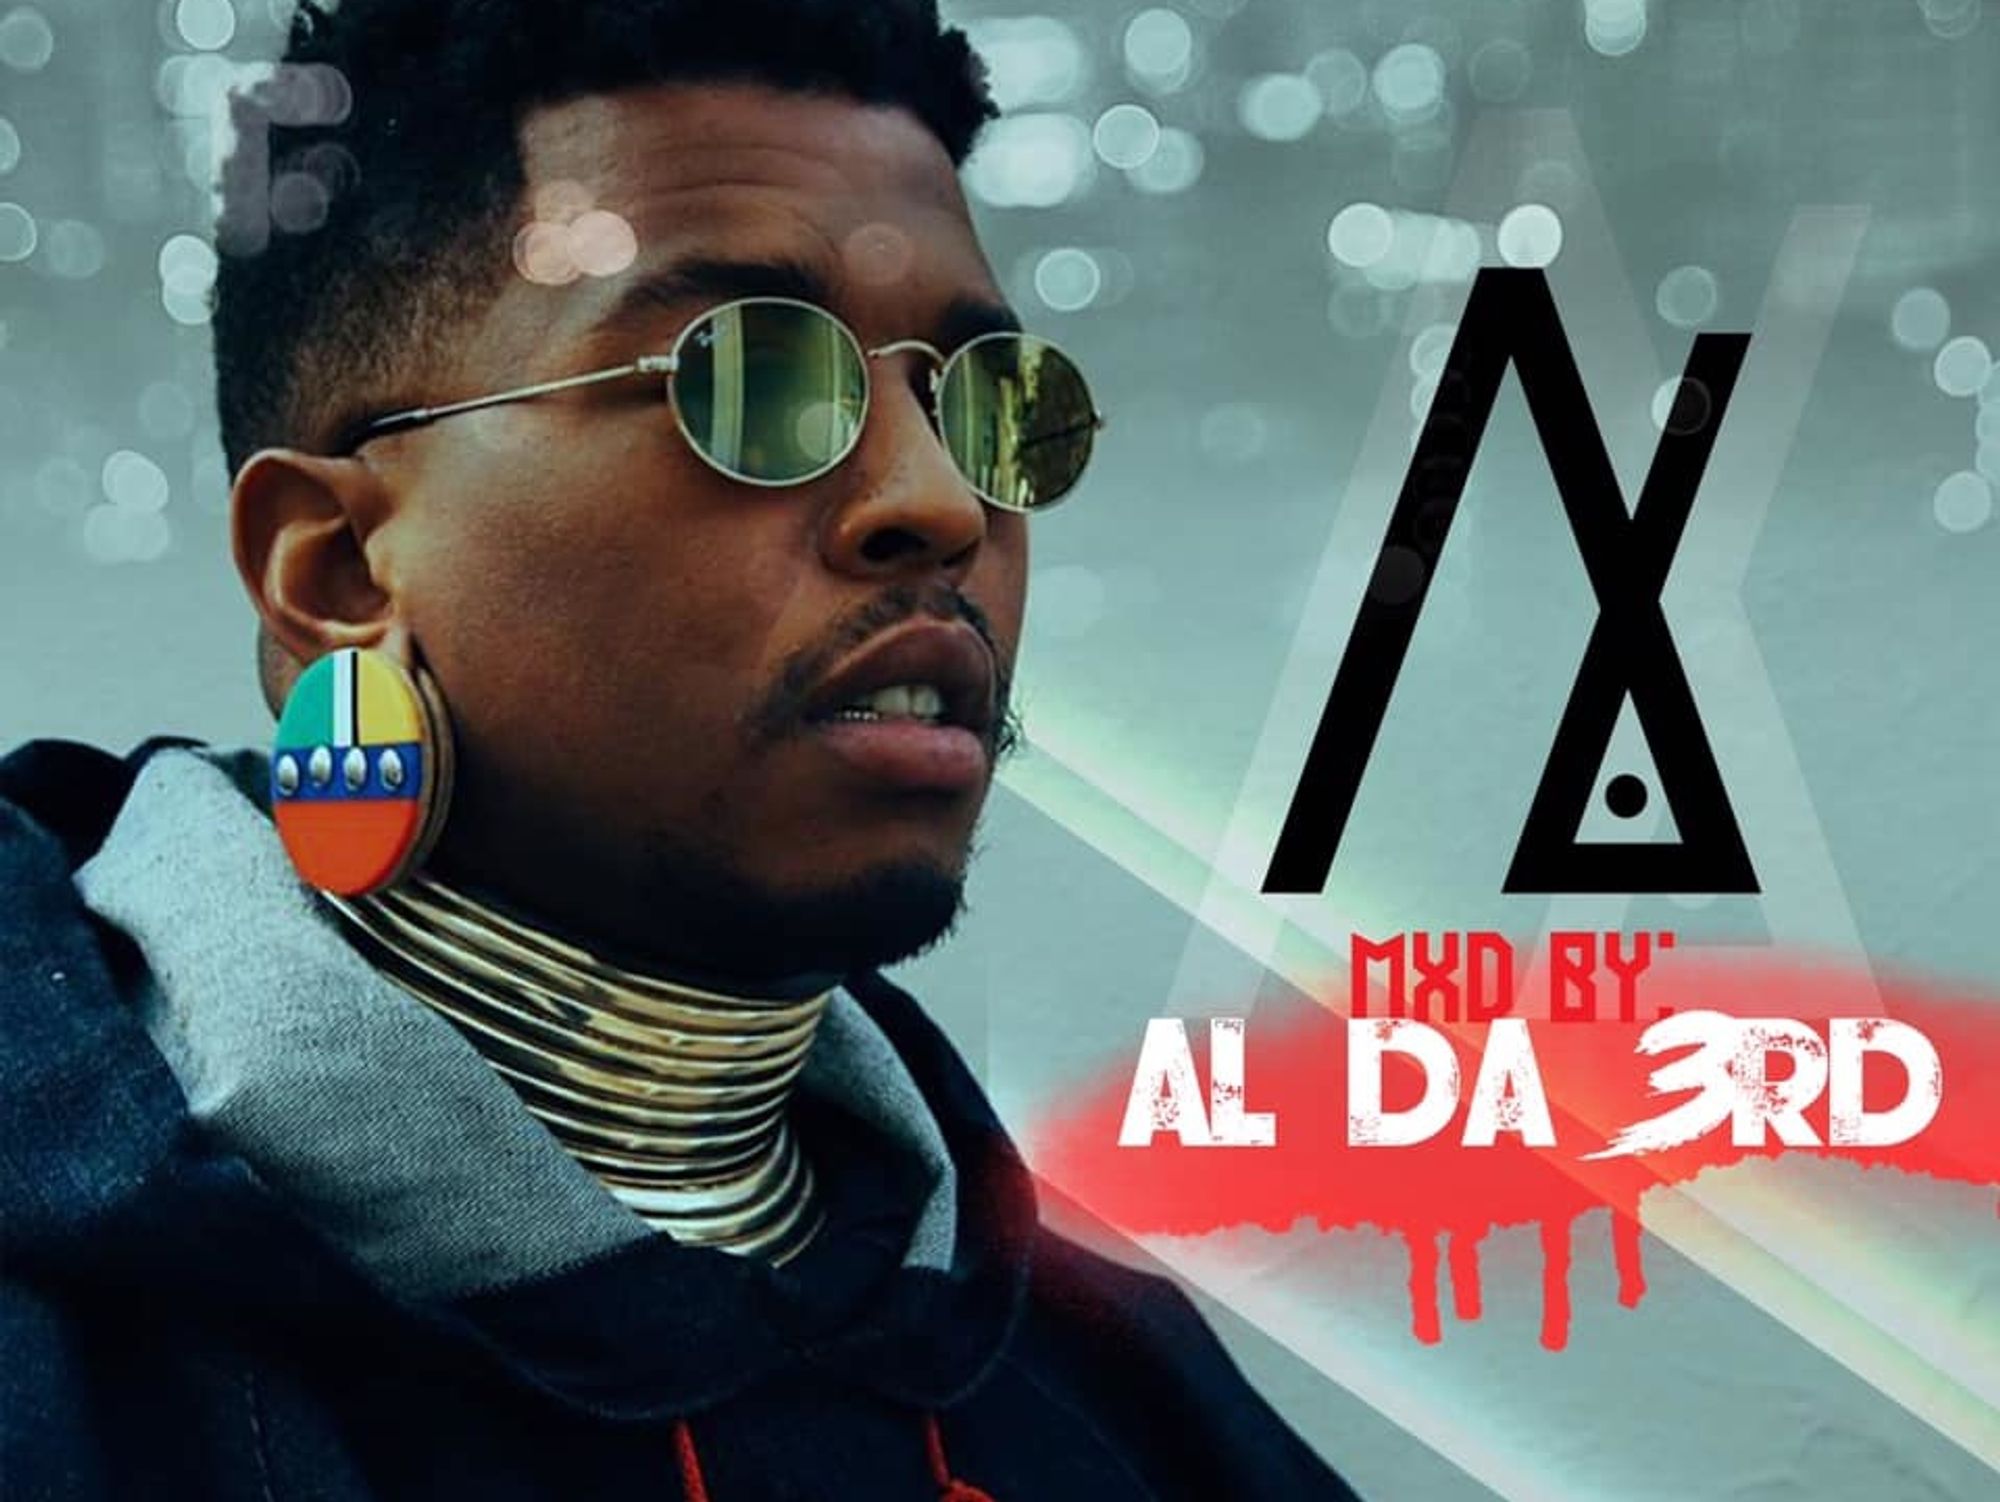 Listen to an Hour-Long Mix of Songs Produced by Anatii